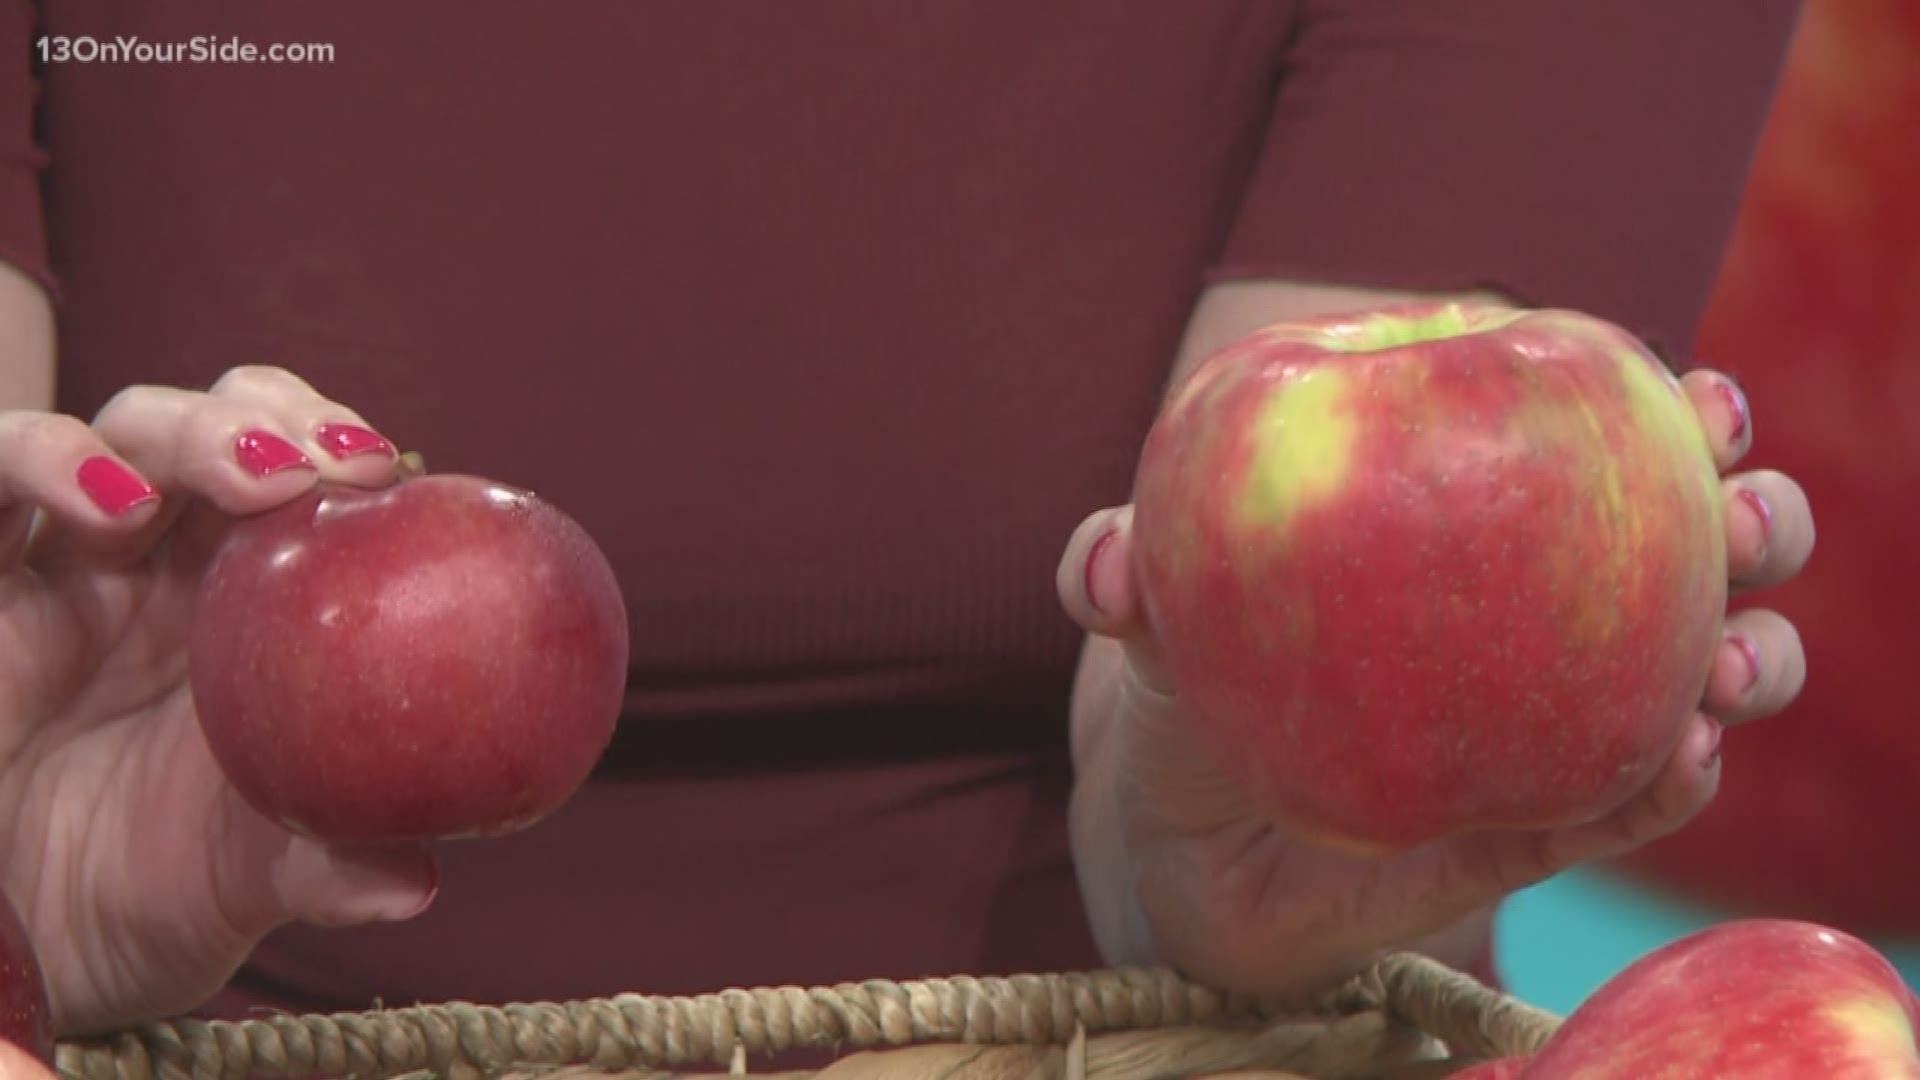 Apple season is here and thriving! Nick Schweitzer of Schweitzer Orchard talks with us about how to pick the perfect apple.